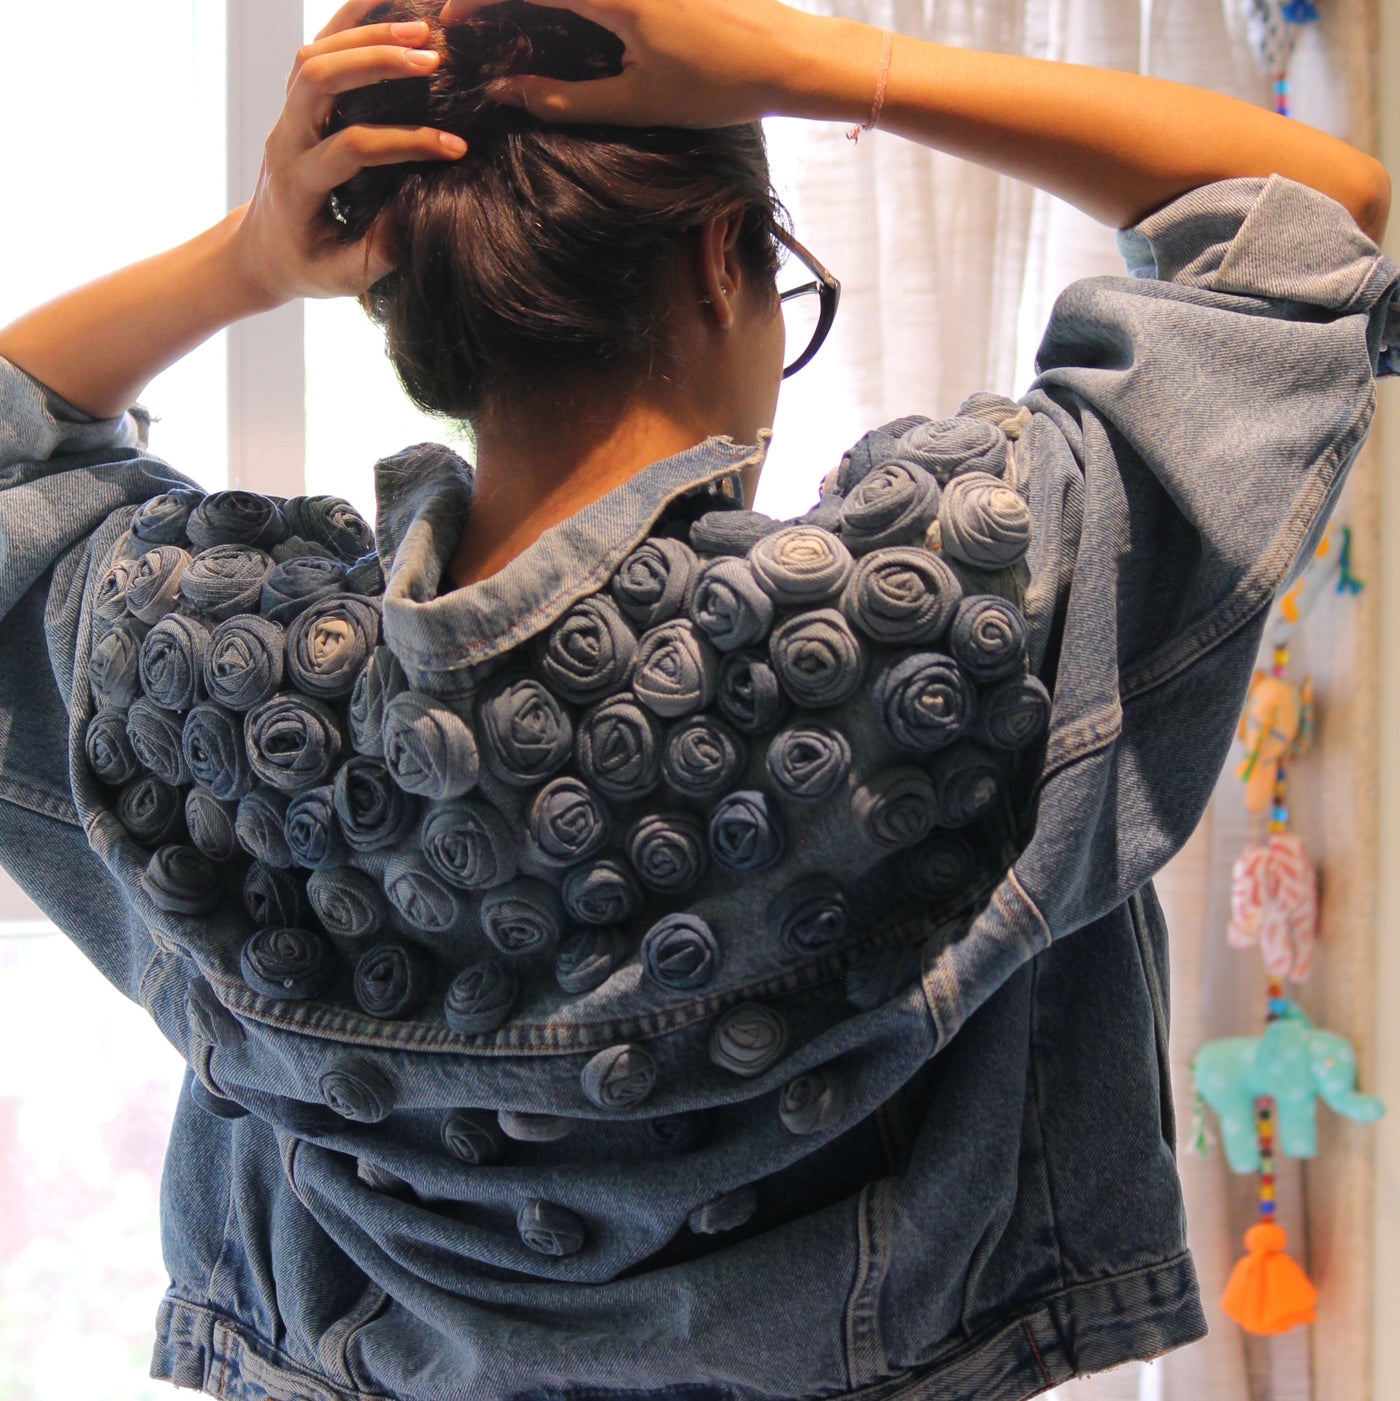 denim rose jacket is made out of fabric scraps